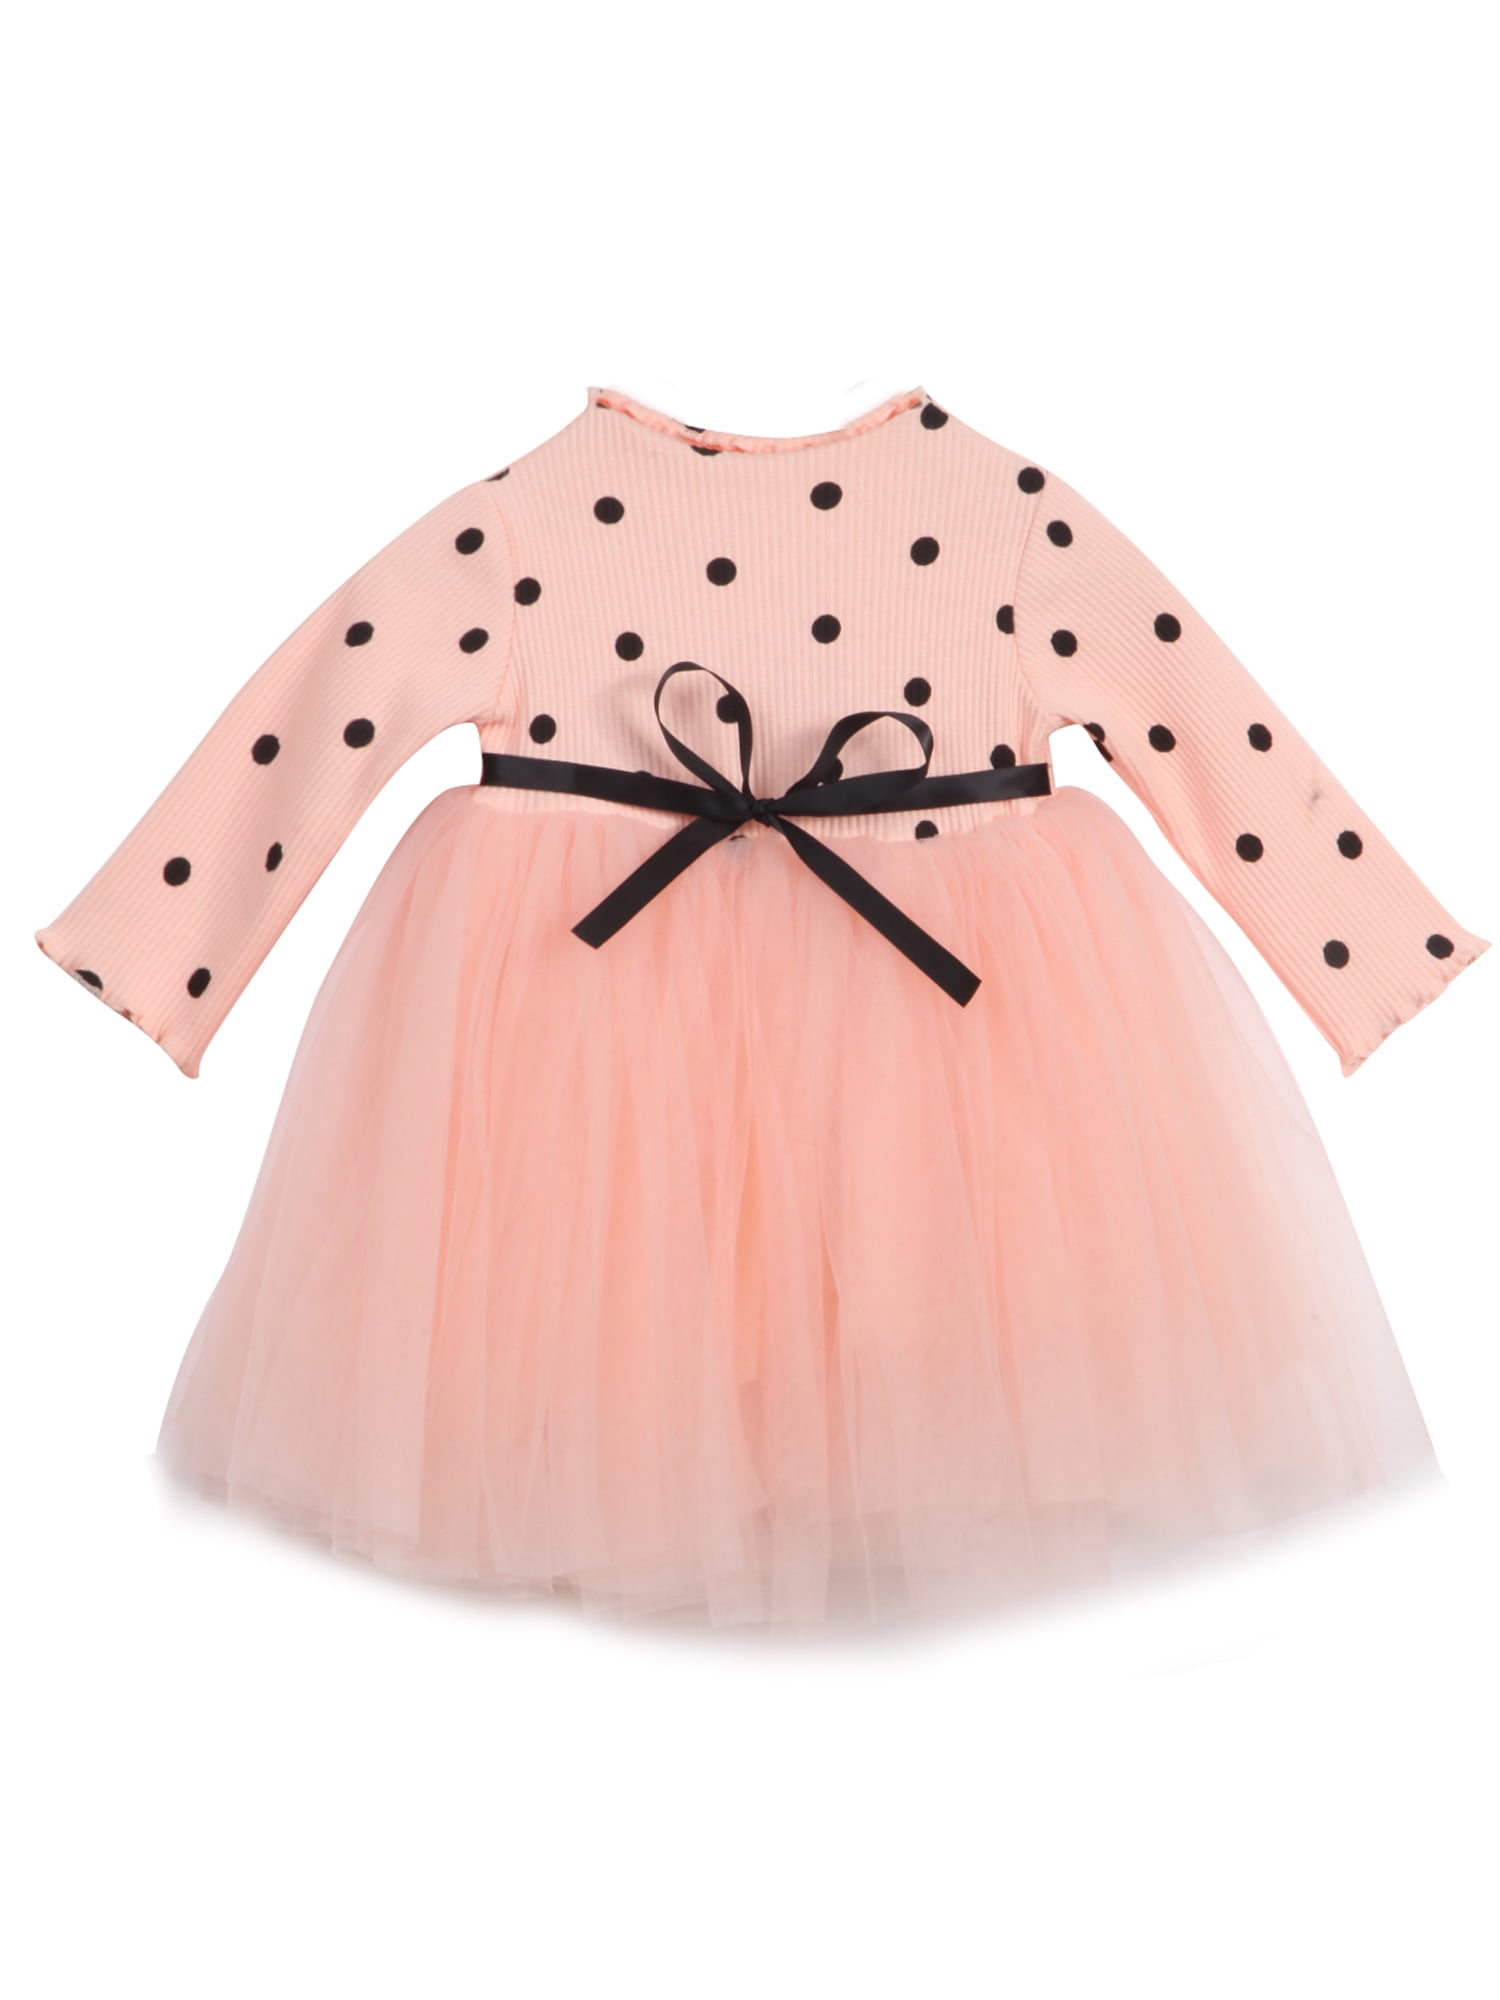 Toddler Kids Baby Girl Floral Long Sleeve Princess Tulle Dress Outfit Clothes DG 